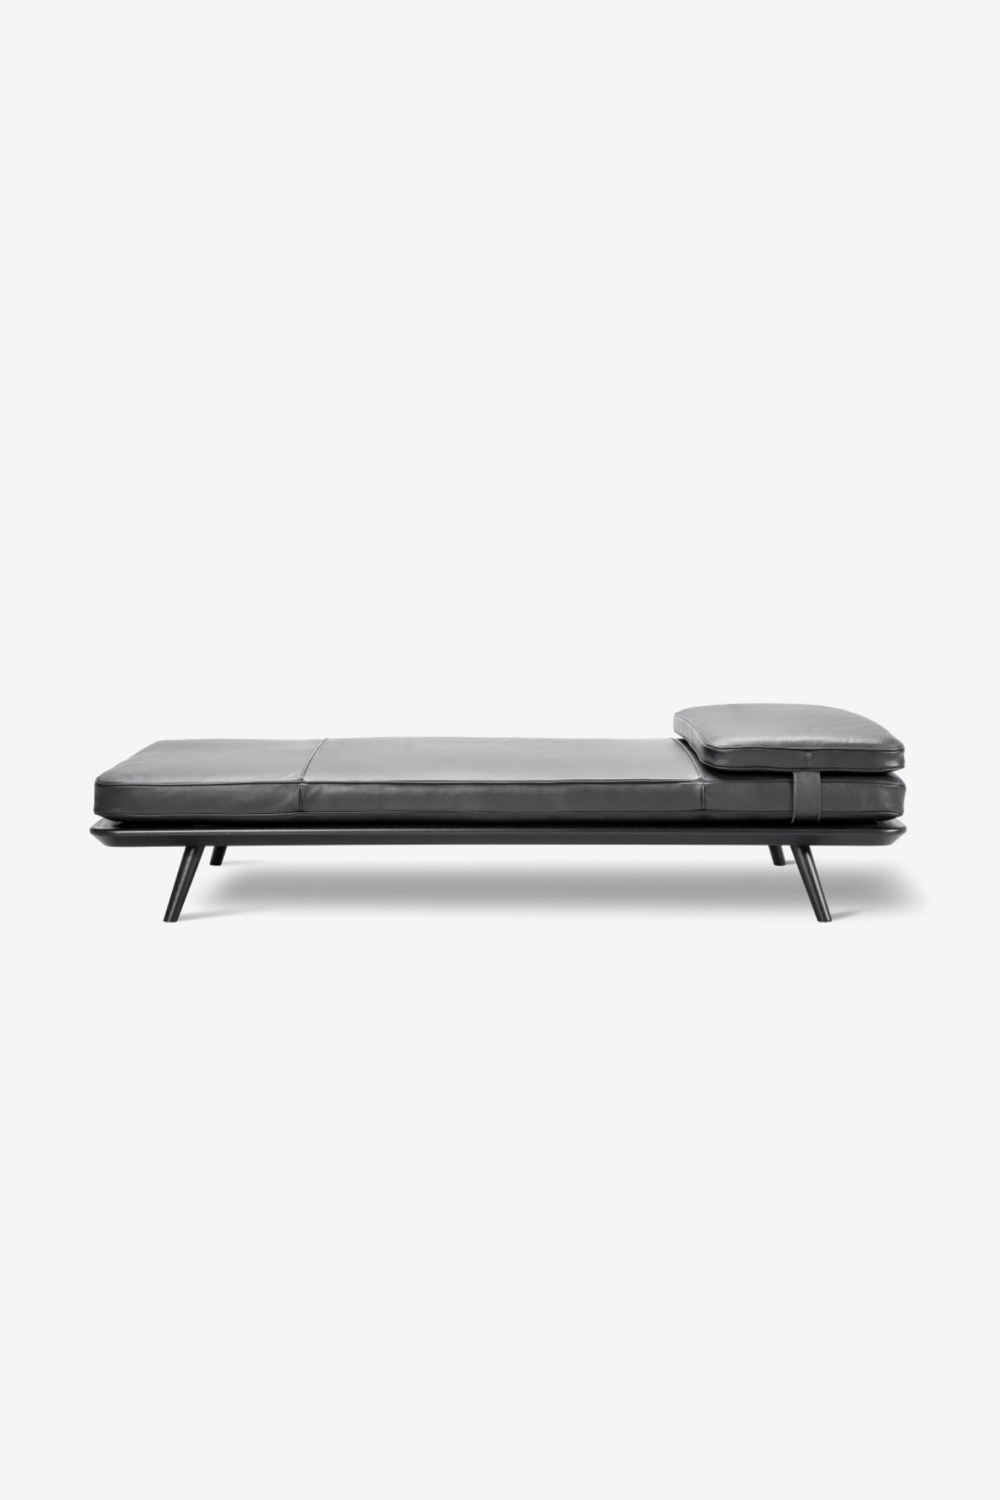 [Fredericia] Spine Daybed (incl.cushion)